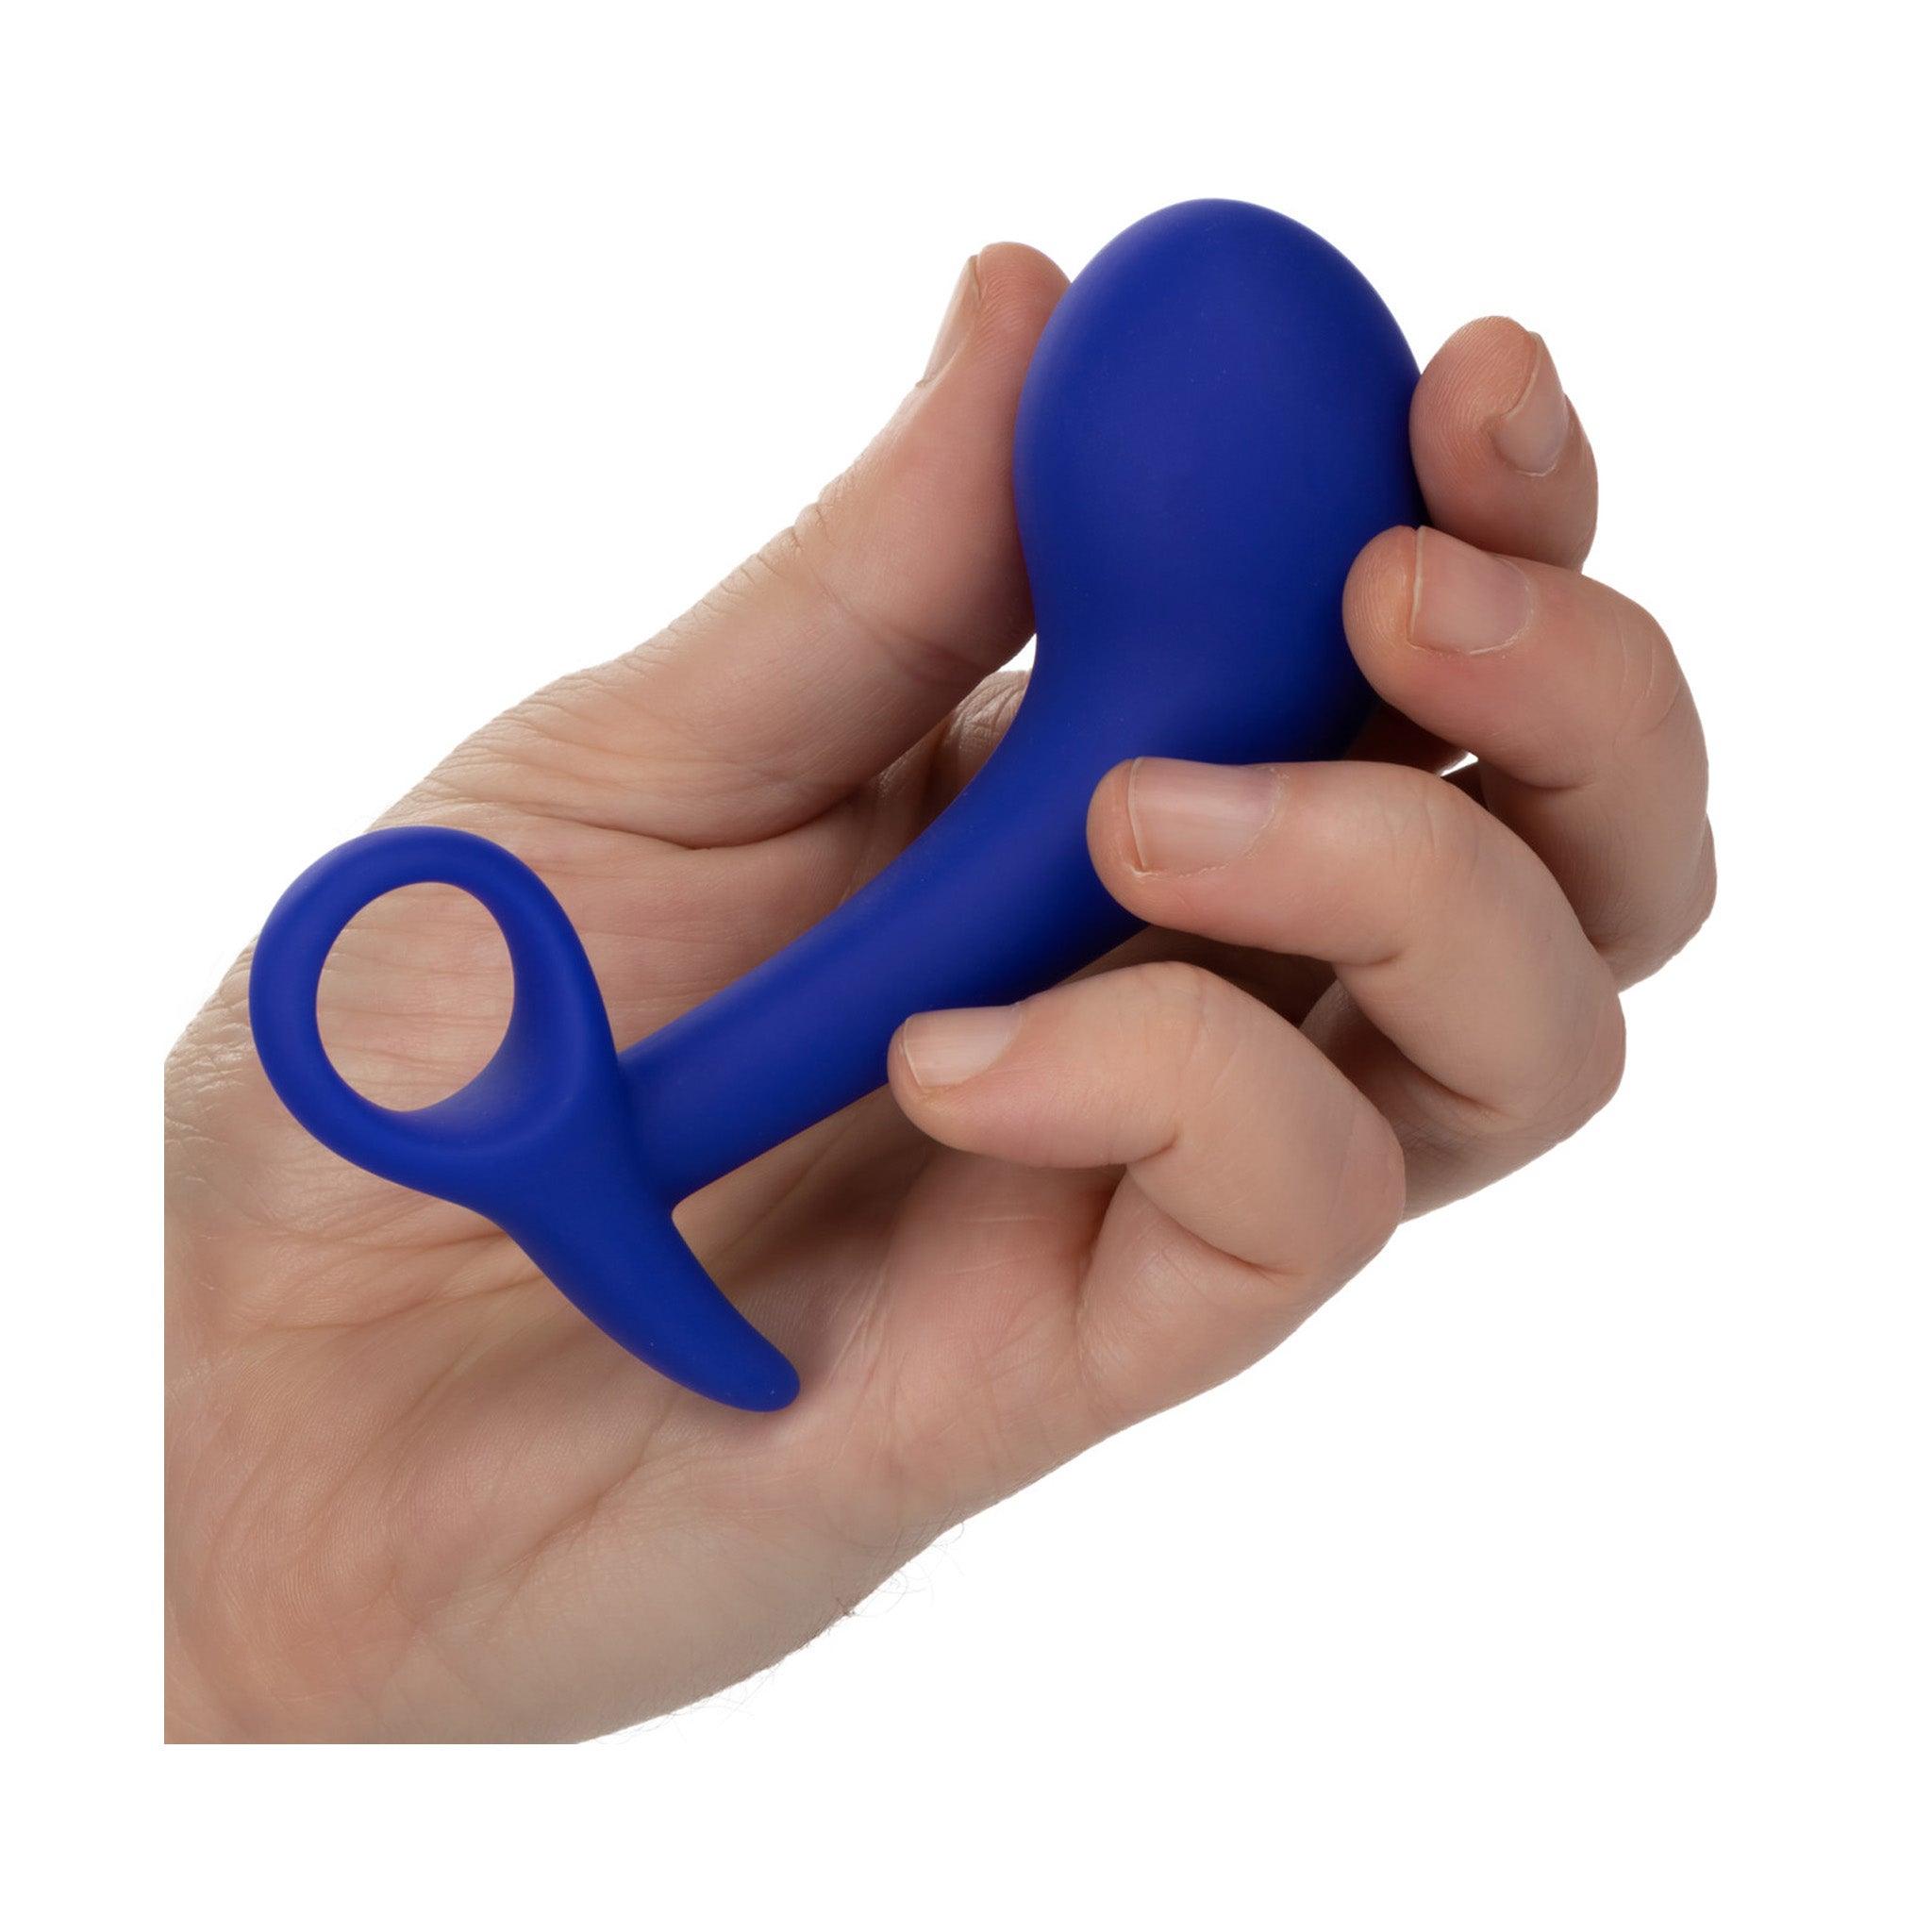 Admiral Silicone Anal Training Set - CheapLubes.com